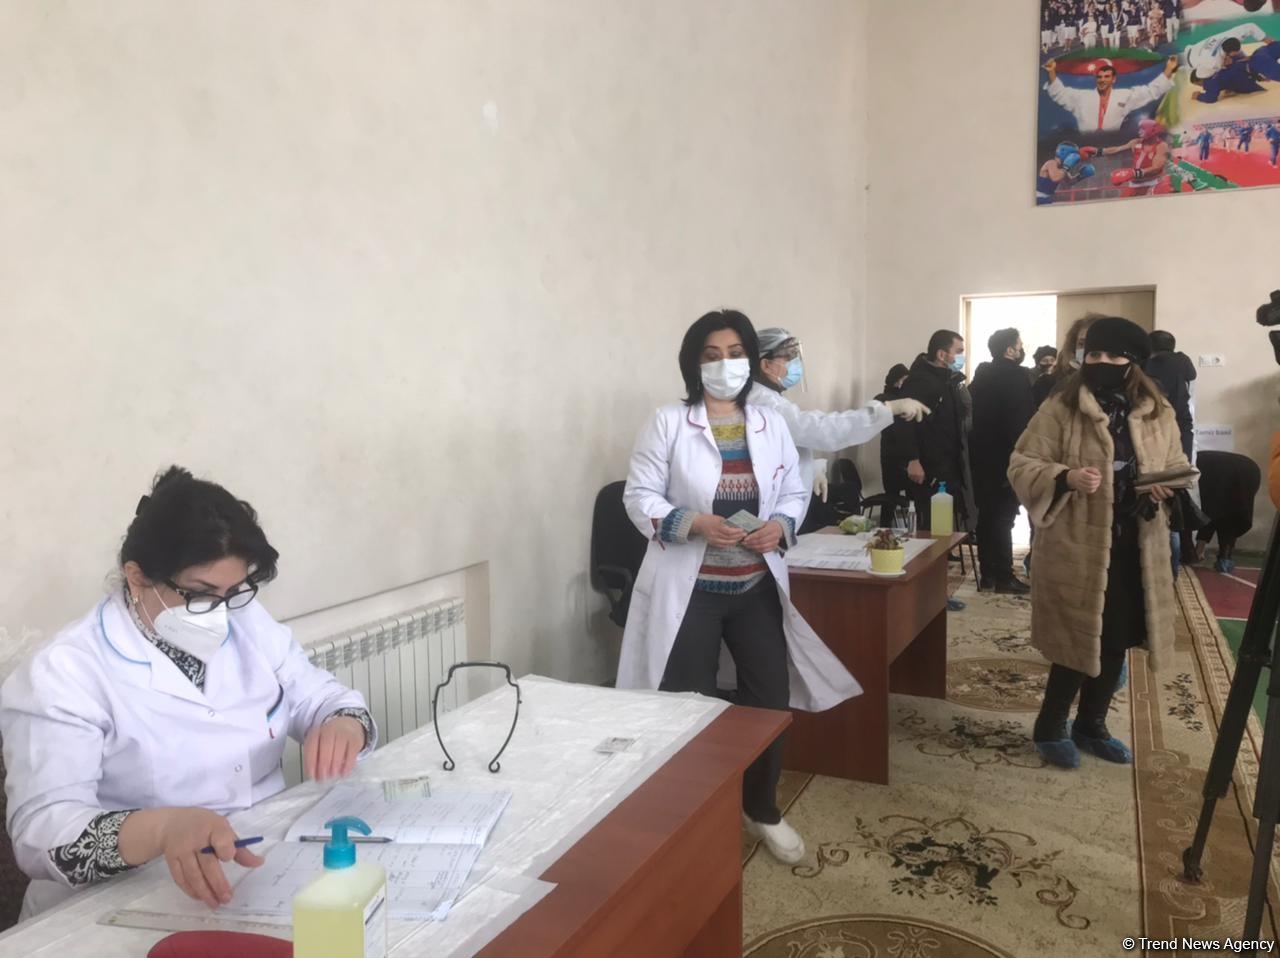 Workers of educational sphere in Baku undergoing COVID-19 vaccination (PHOTO)